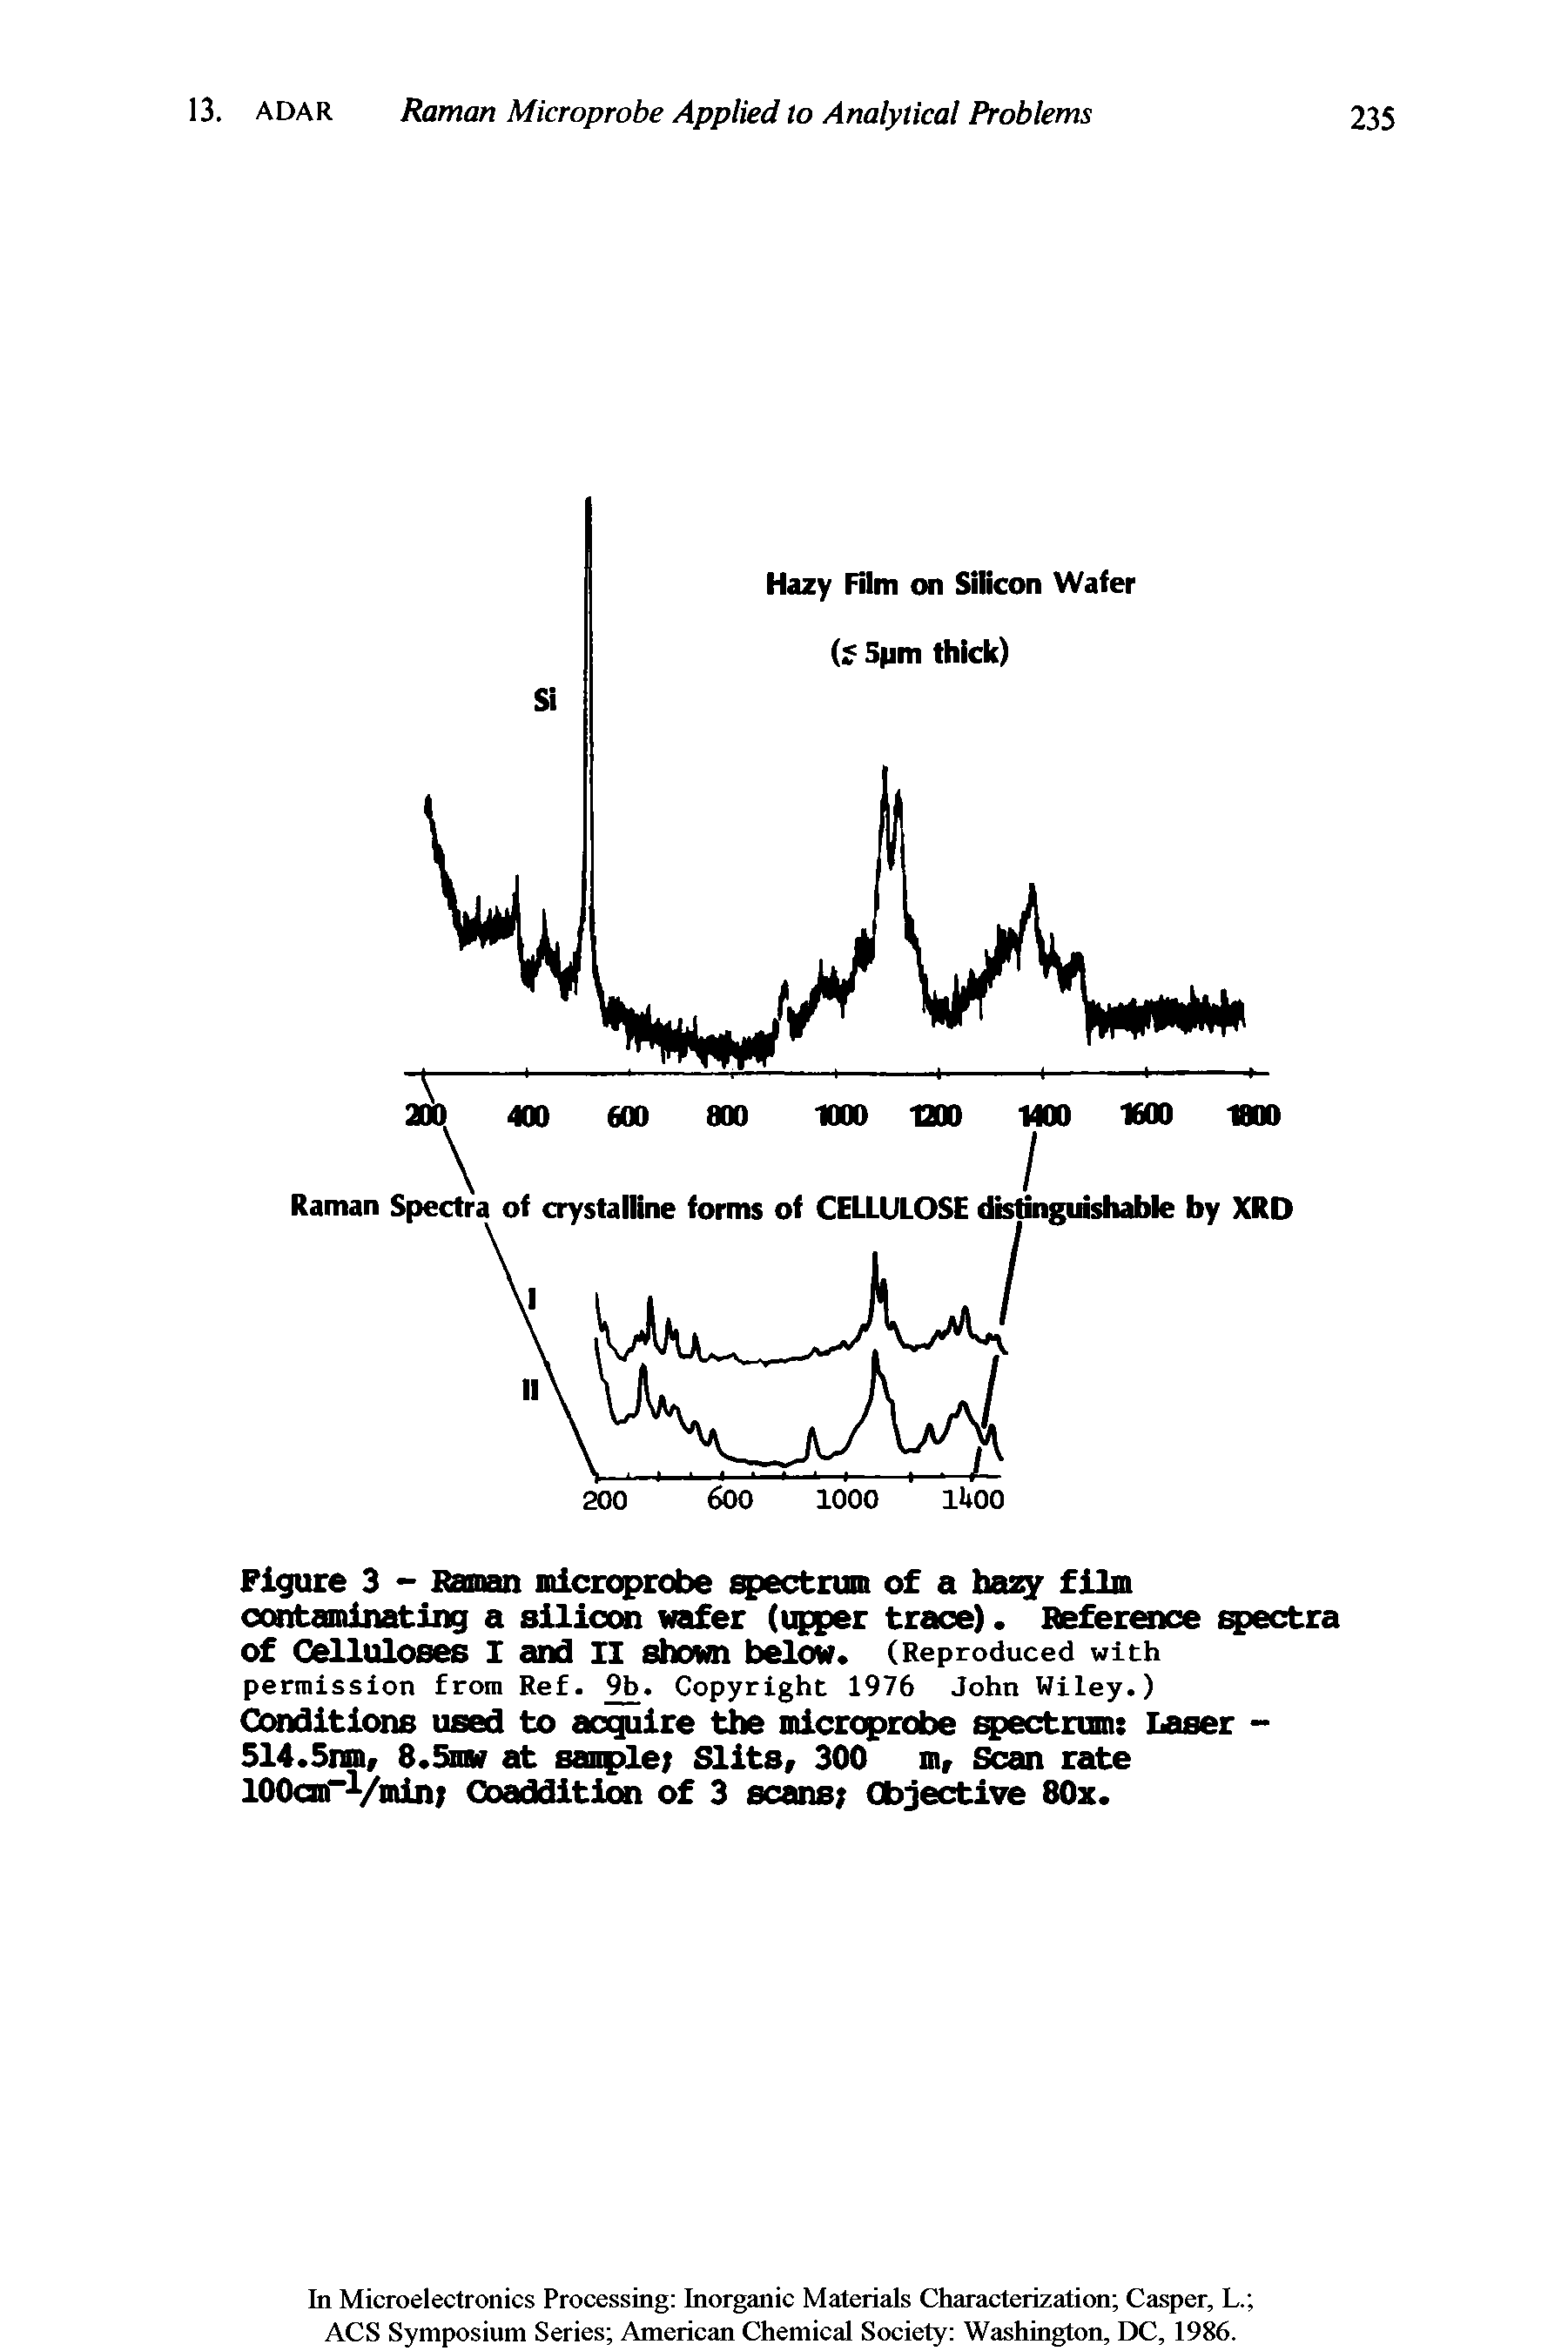 Figure 3 - Baman microprobe aectrum of a hazy film omtaminating a silicon wafer (upper trace). Reference spectra of Celluloses I and II shown below. (Reproduced with permission from Ref. 9b. Copyright 1976 John Wiley.)...